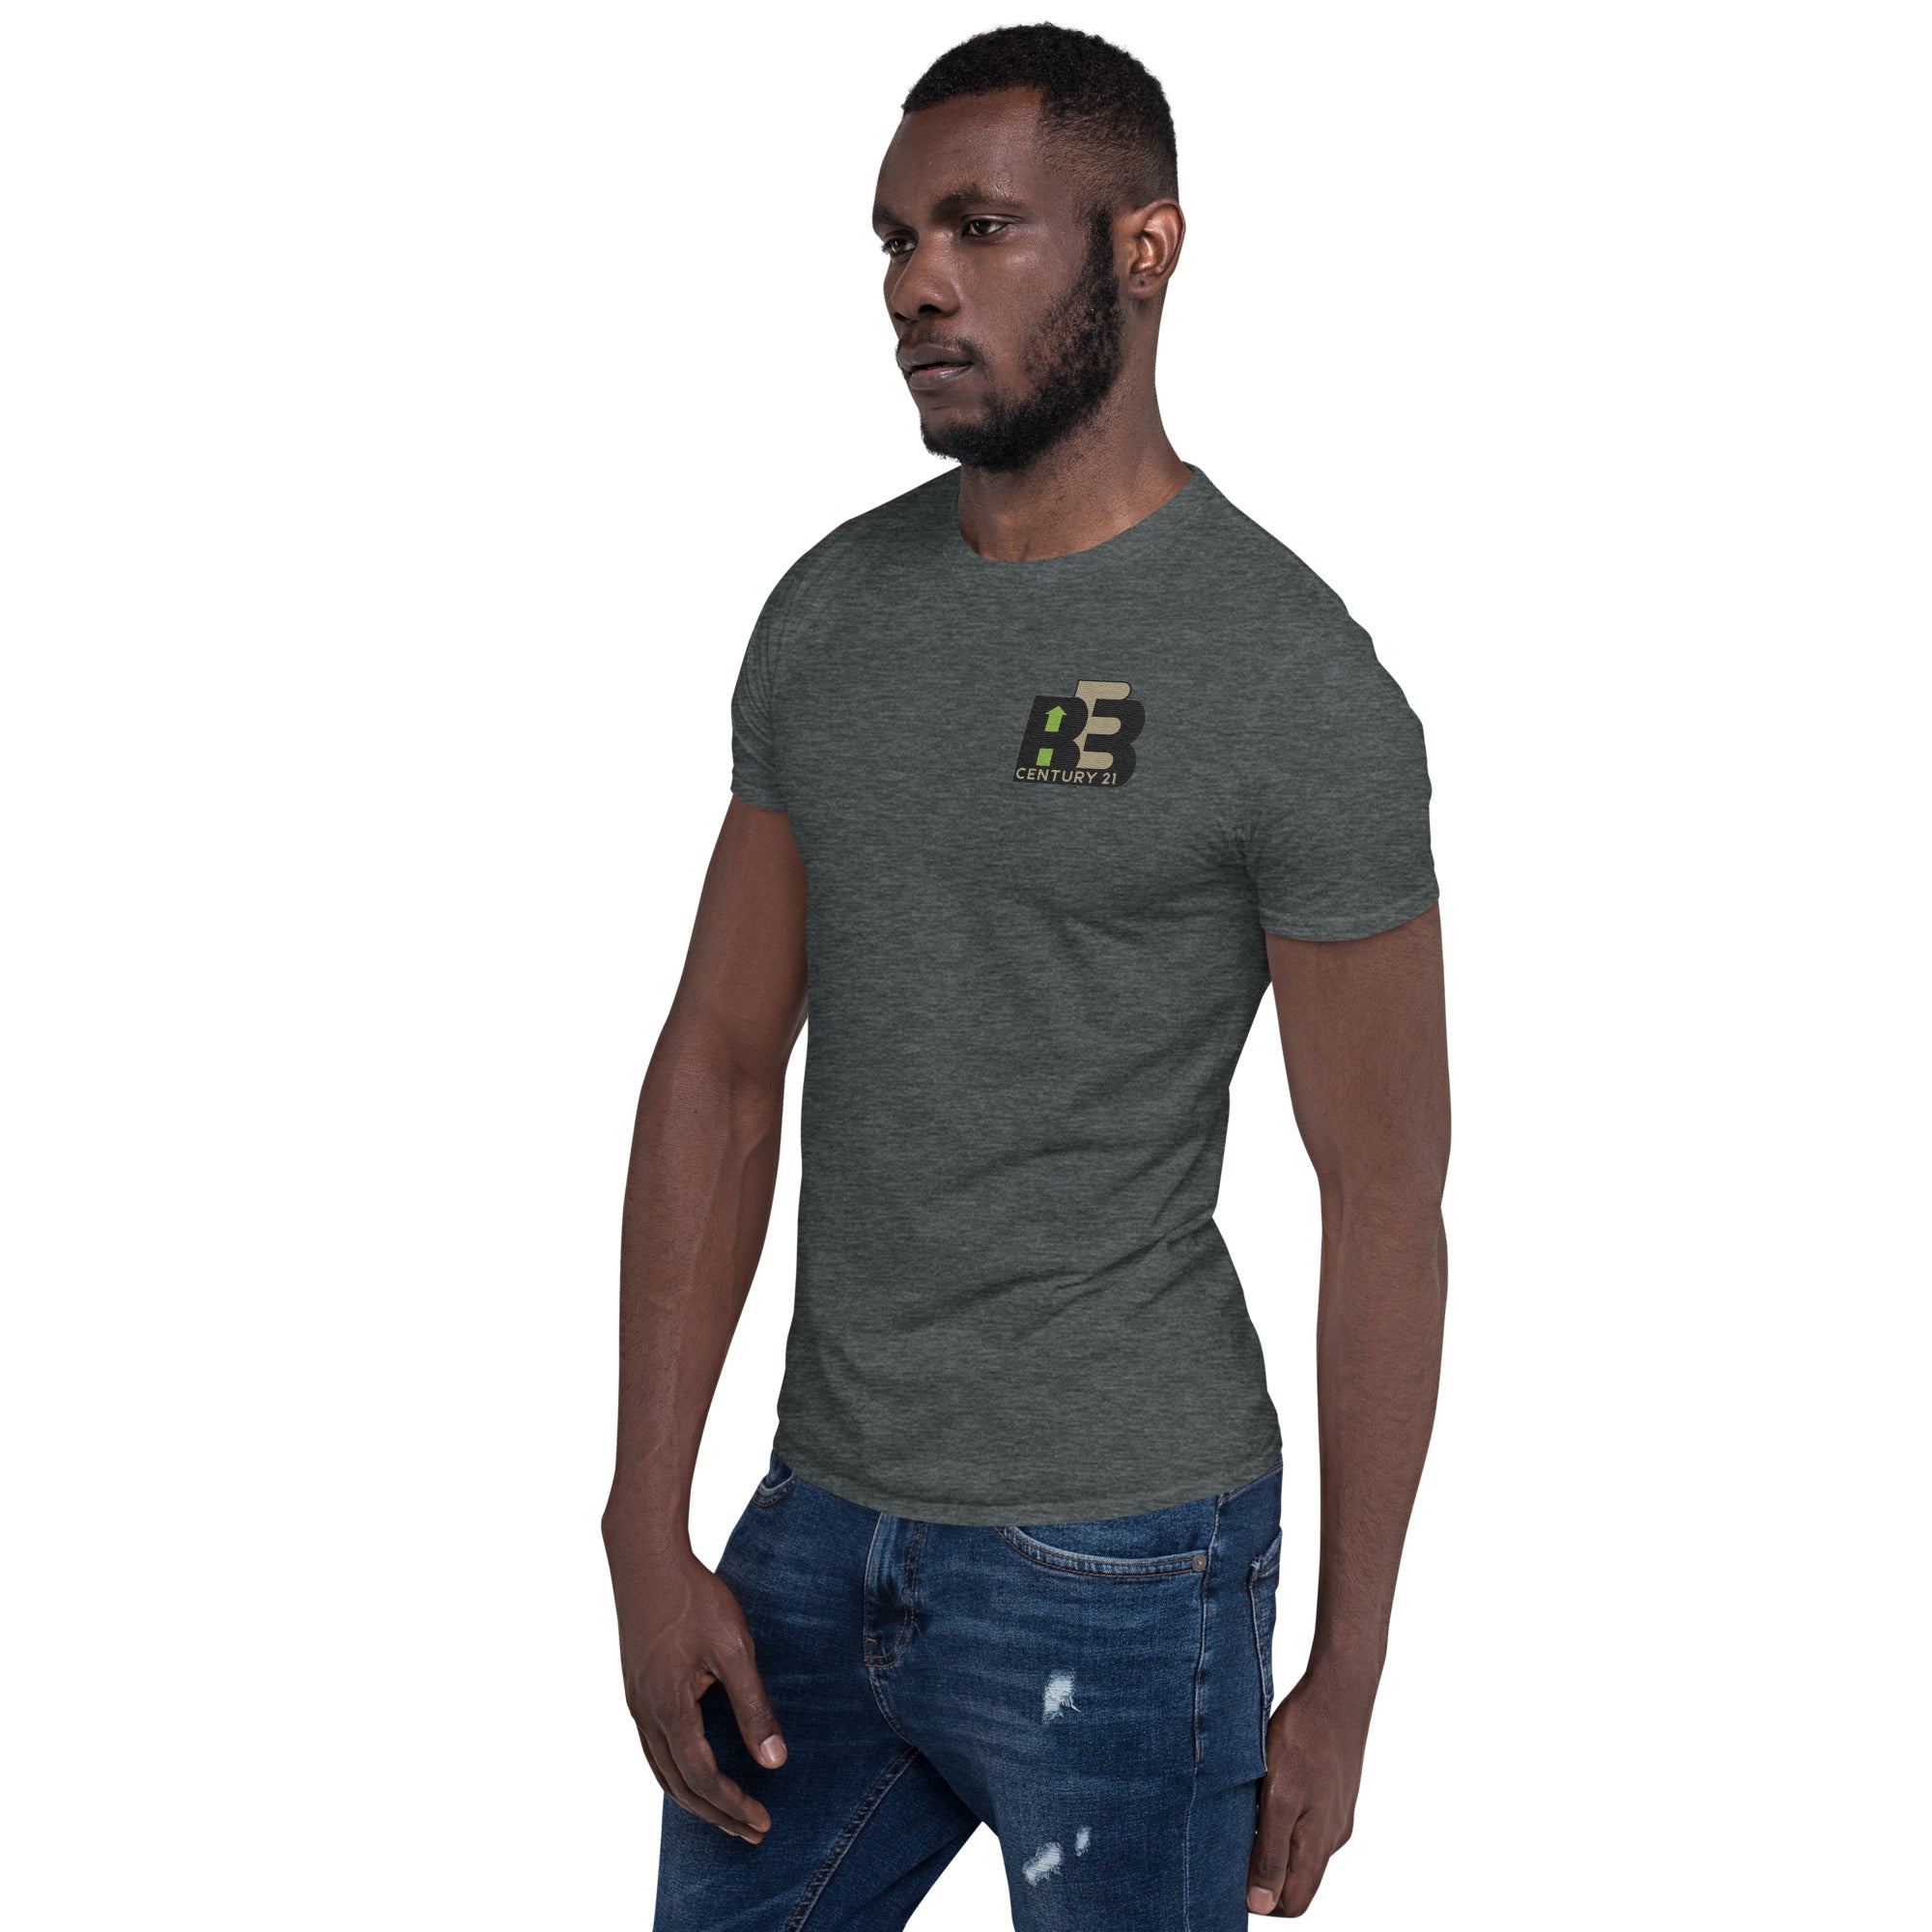 BE3 Embroidered Seal Short-Sleeve Men's T-Shirt